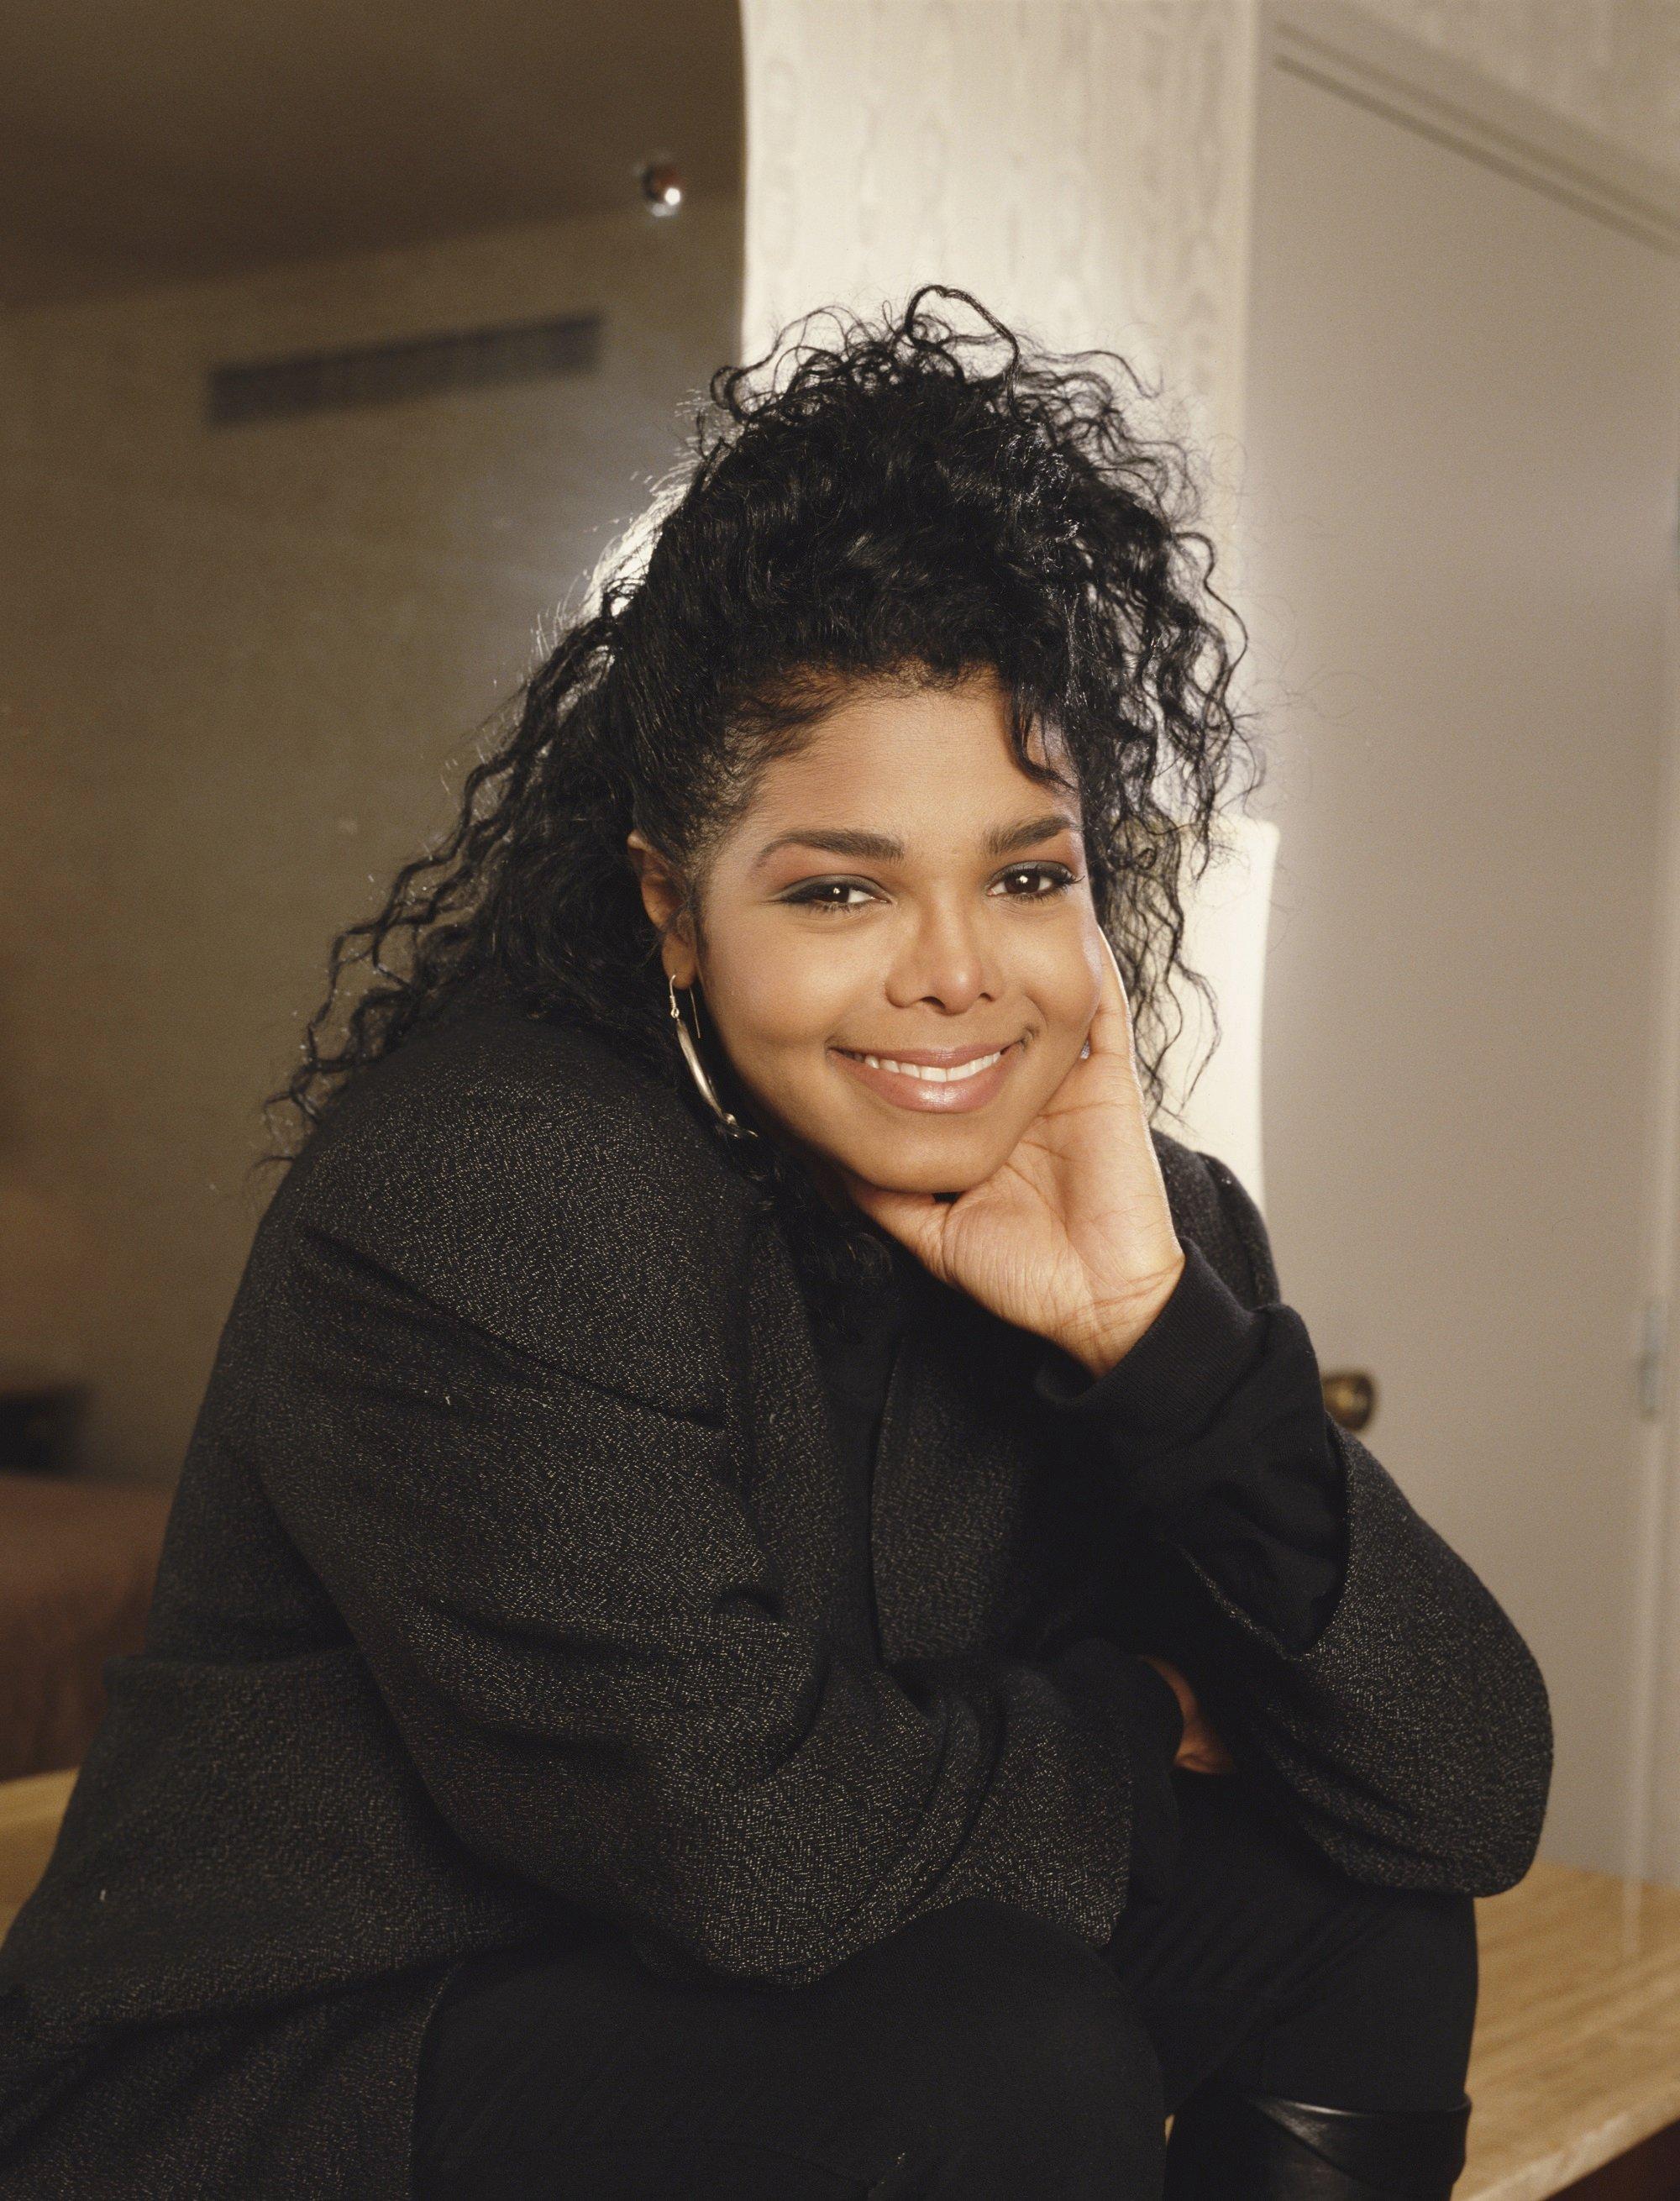 Janet Jackson photographed in 1990